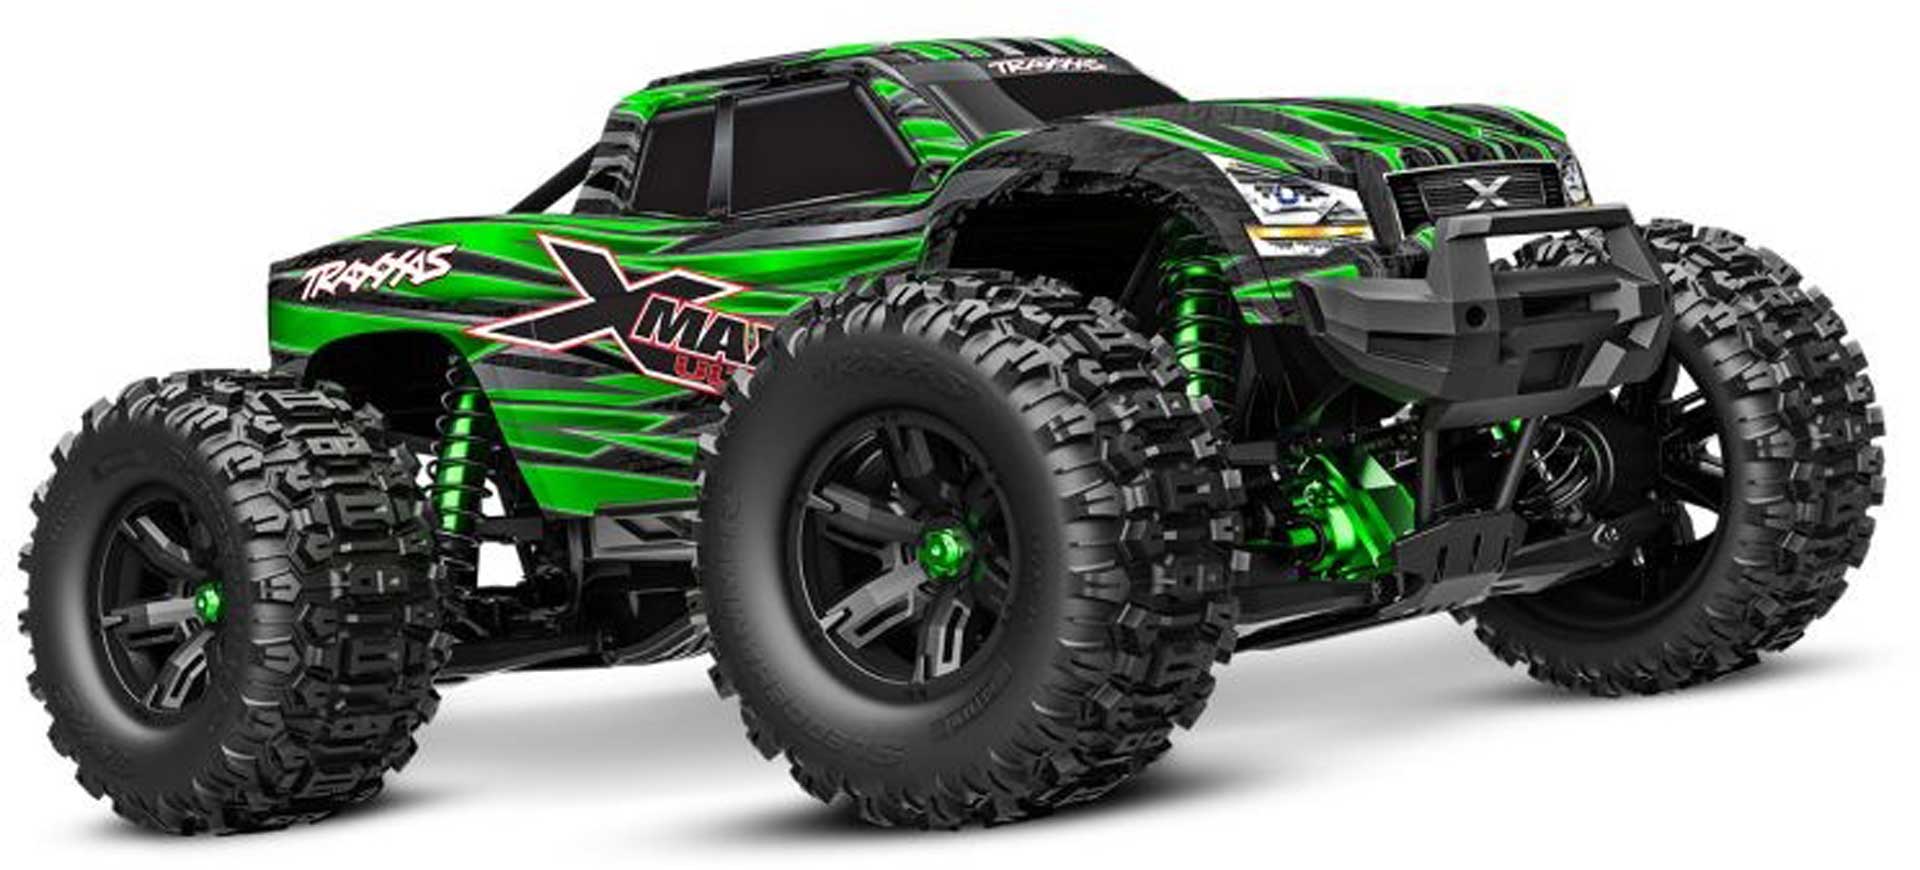 TRAXXAS X-MAXX ULTIMATE 4X4 VXL GREEN 1/7 MONSTER-TRUCK RTR BRUSHLESS WITHOUT BATTERY AND CHARGER (LIMITED VERSION)